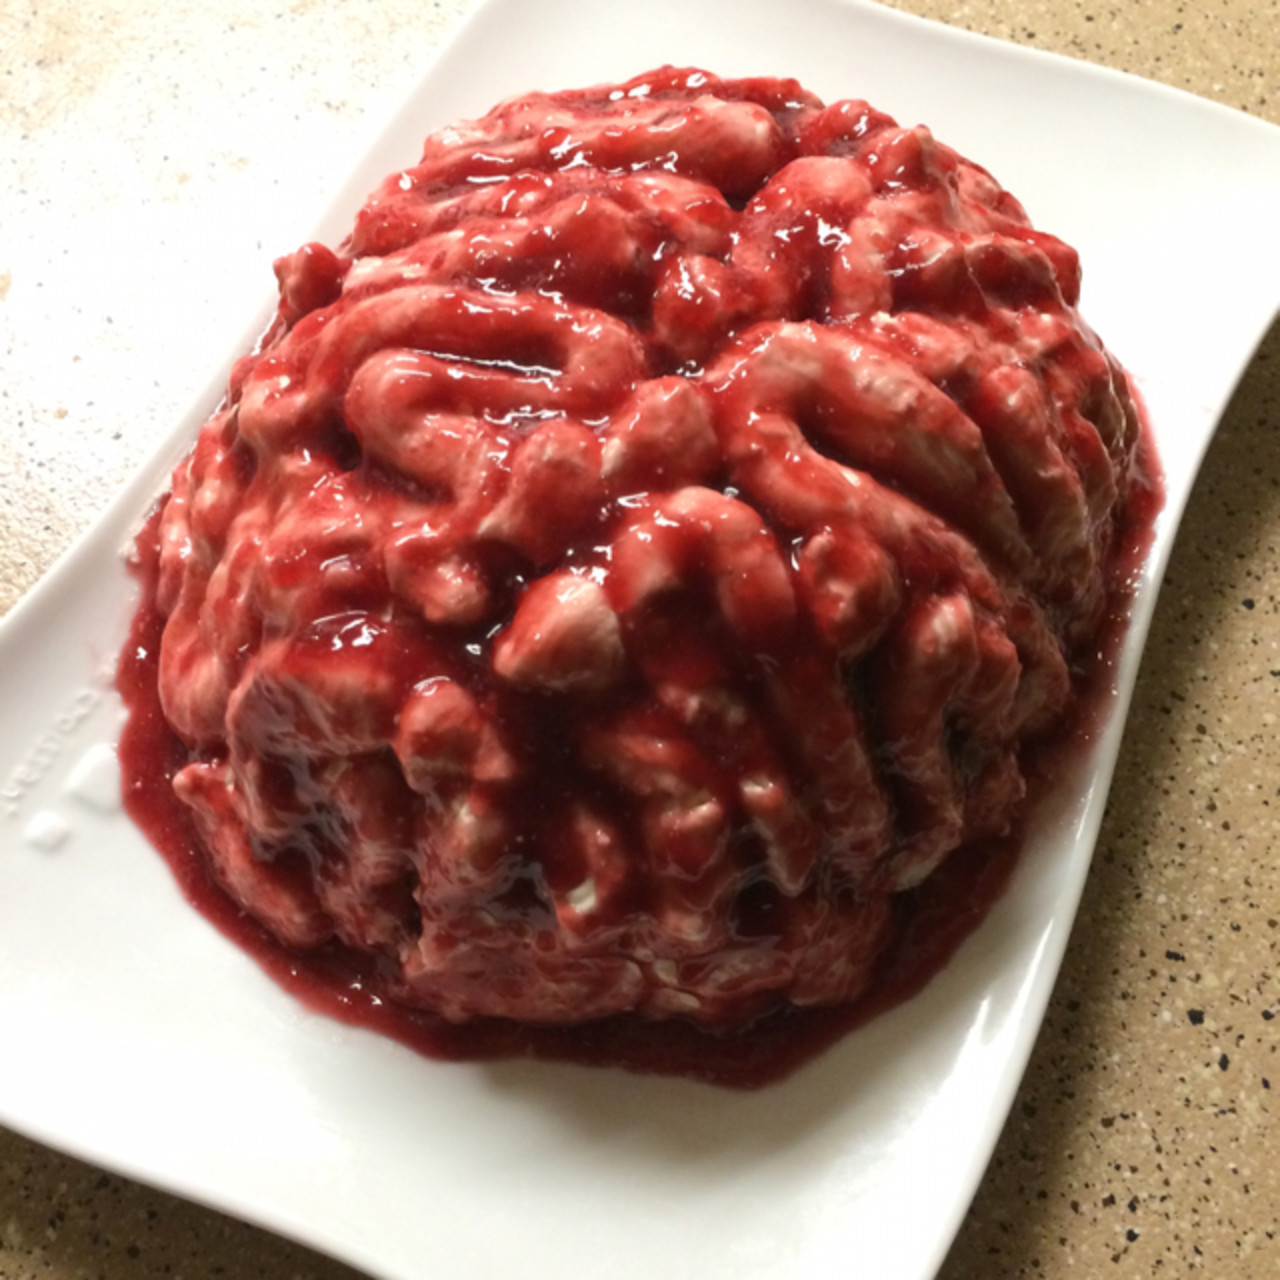 Try Not to Puke- How to Make Brain Cake for Halloween - YouTube